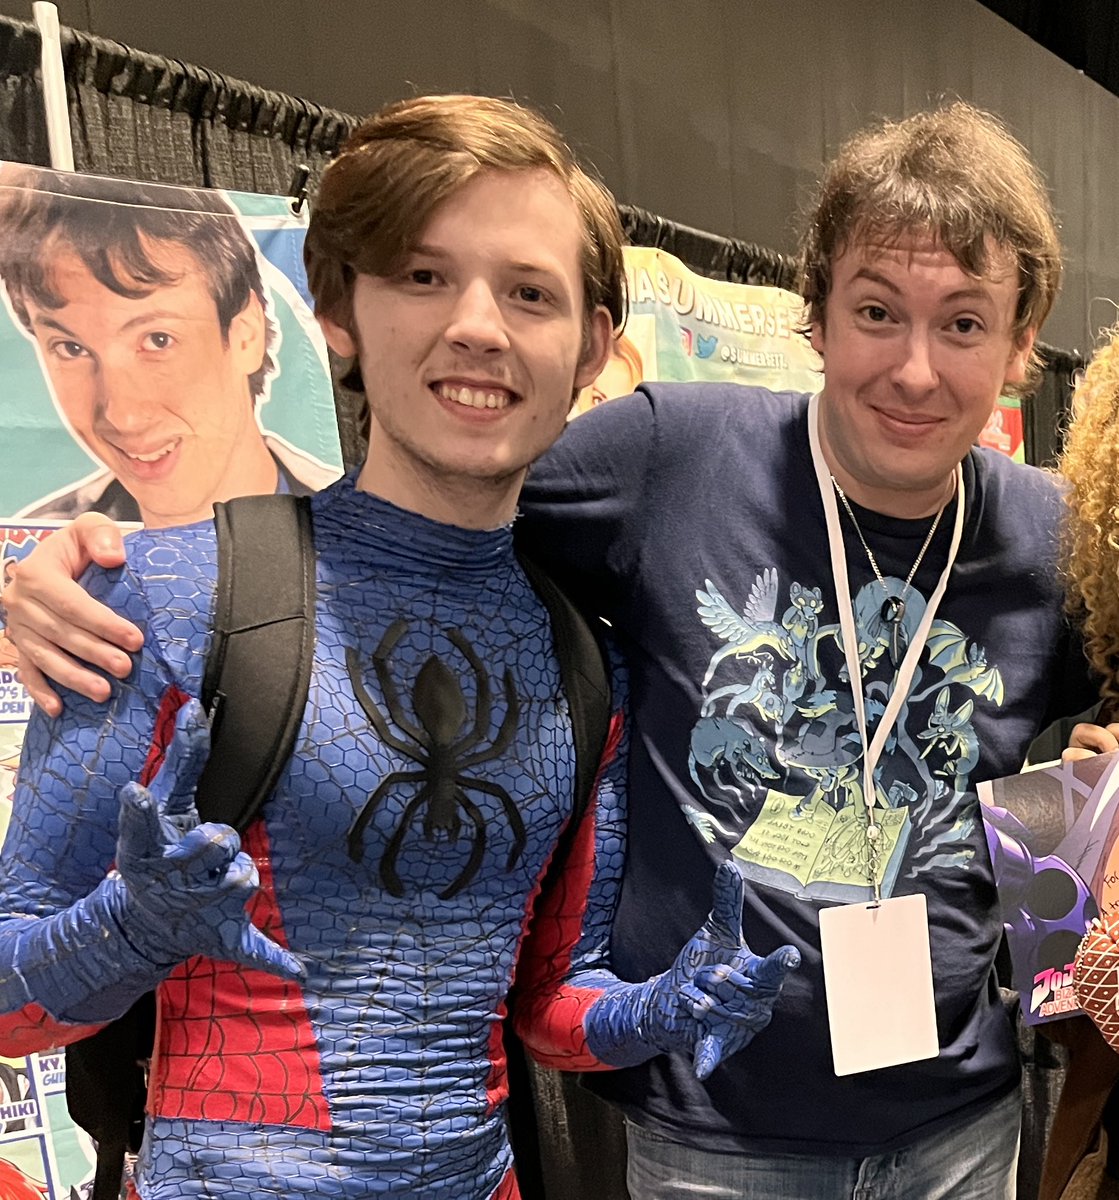 RT @kaiscomics: took a picture with Sean Chiplock the Spider-Man voice actor for the avengers game! @sonicmega https://t.co/Y5DPd1VSUw